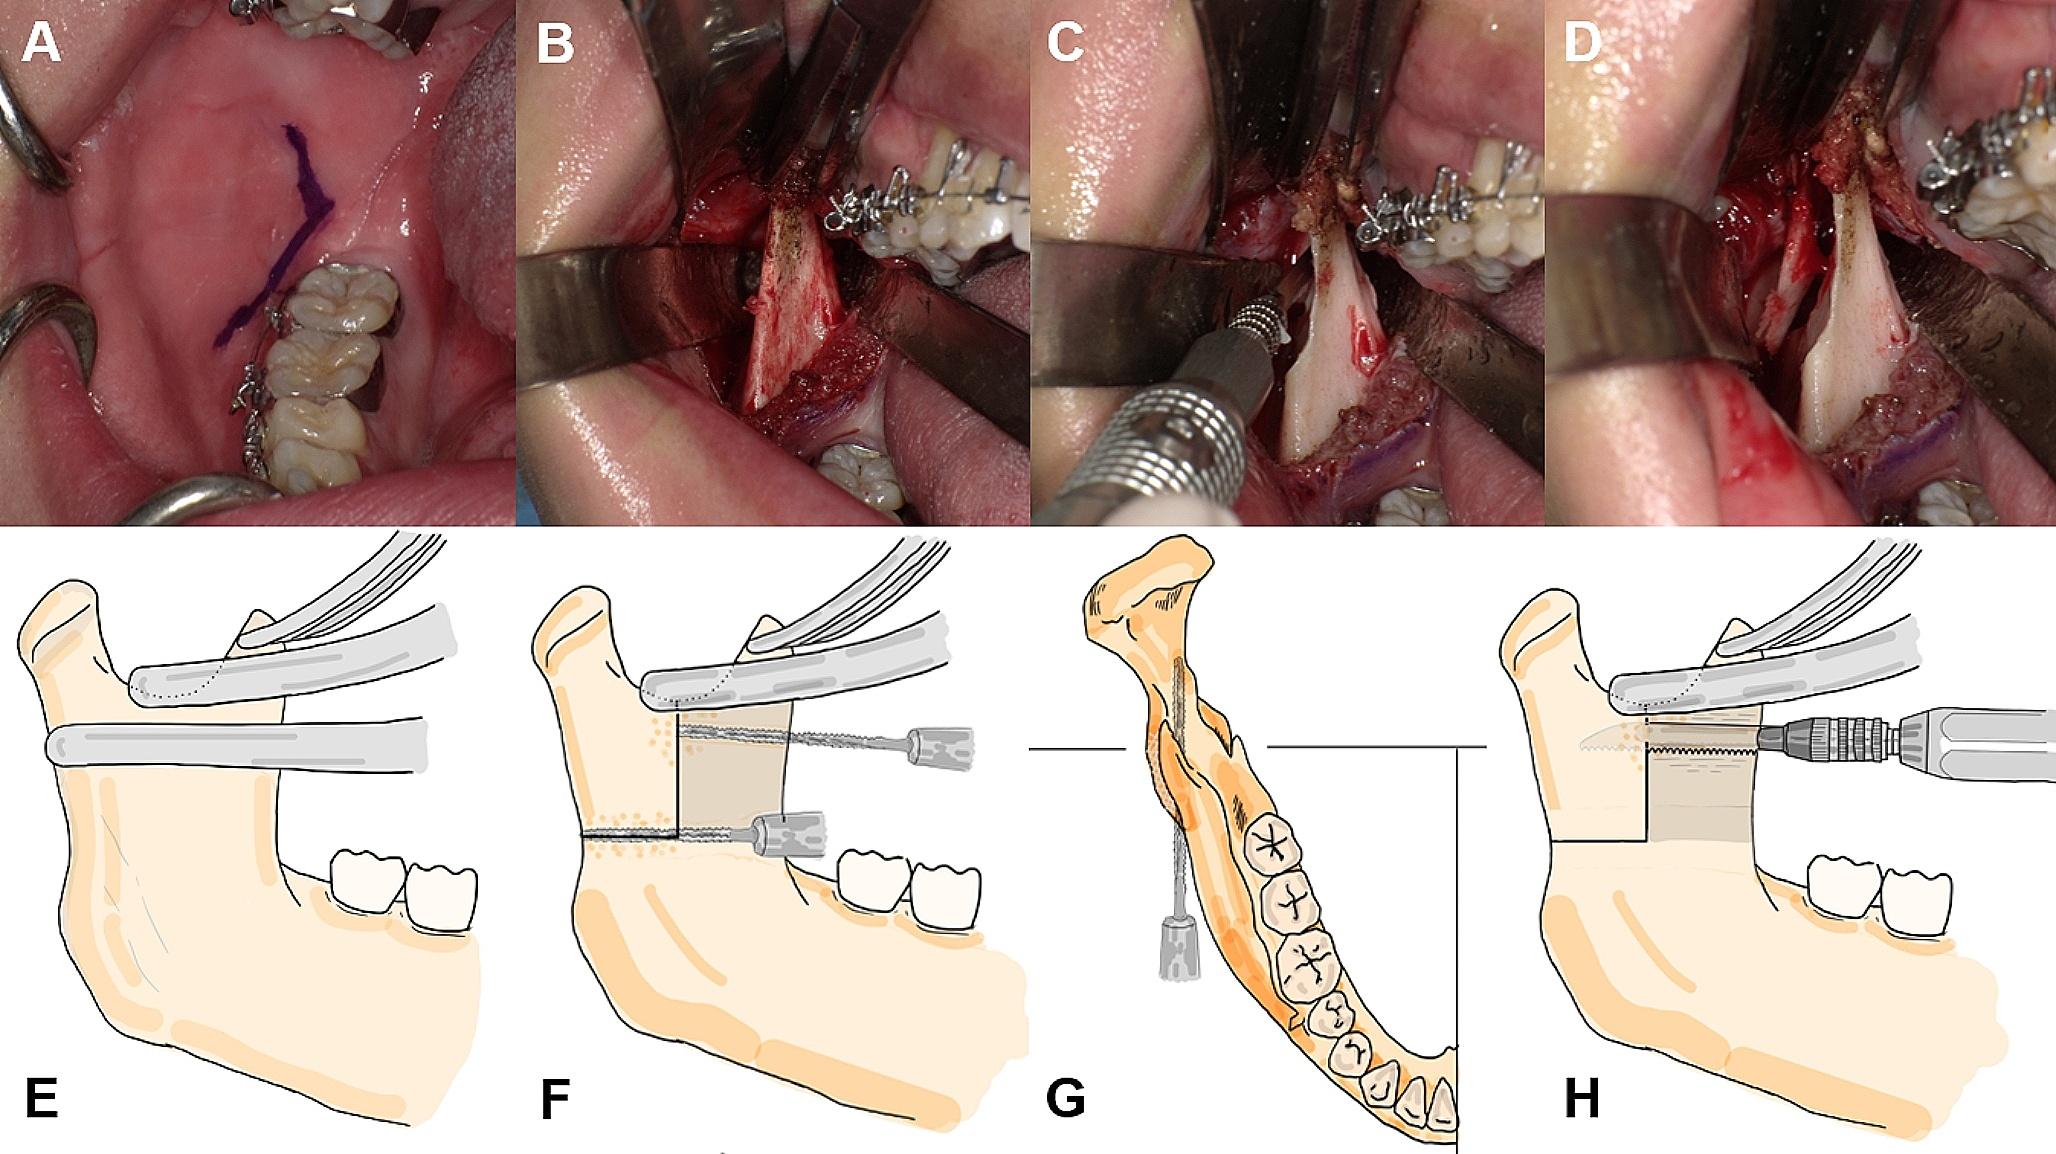 Improvement of the temporomandibular joint symptoms due to the condylar position change following modified L-shaped intraoral vertico-sagittal ramus osteotomy: a single-center, retrospective study